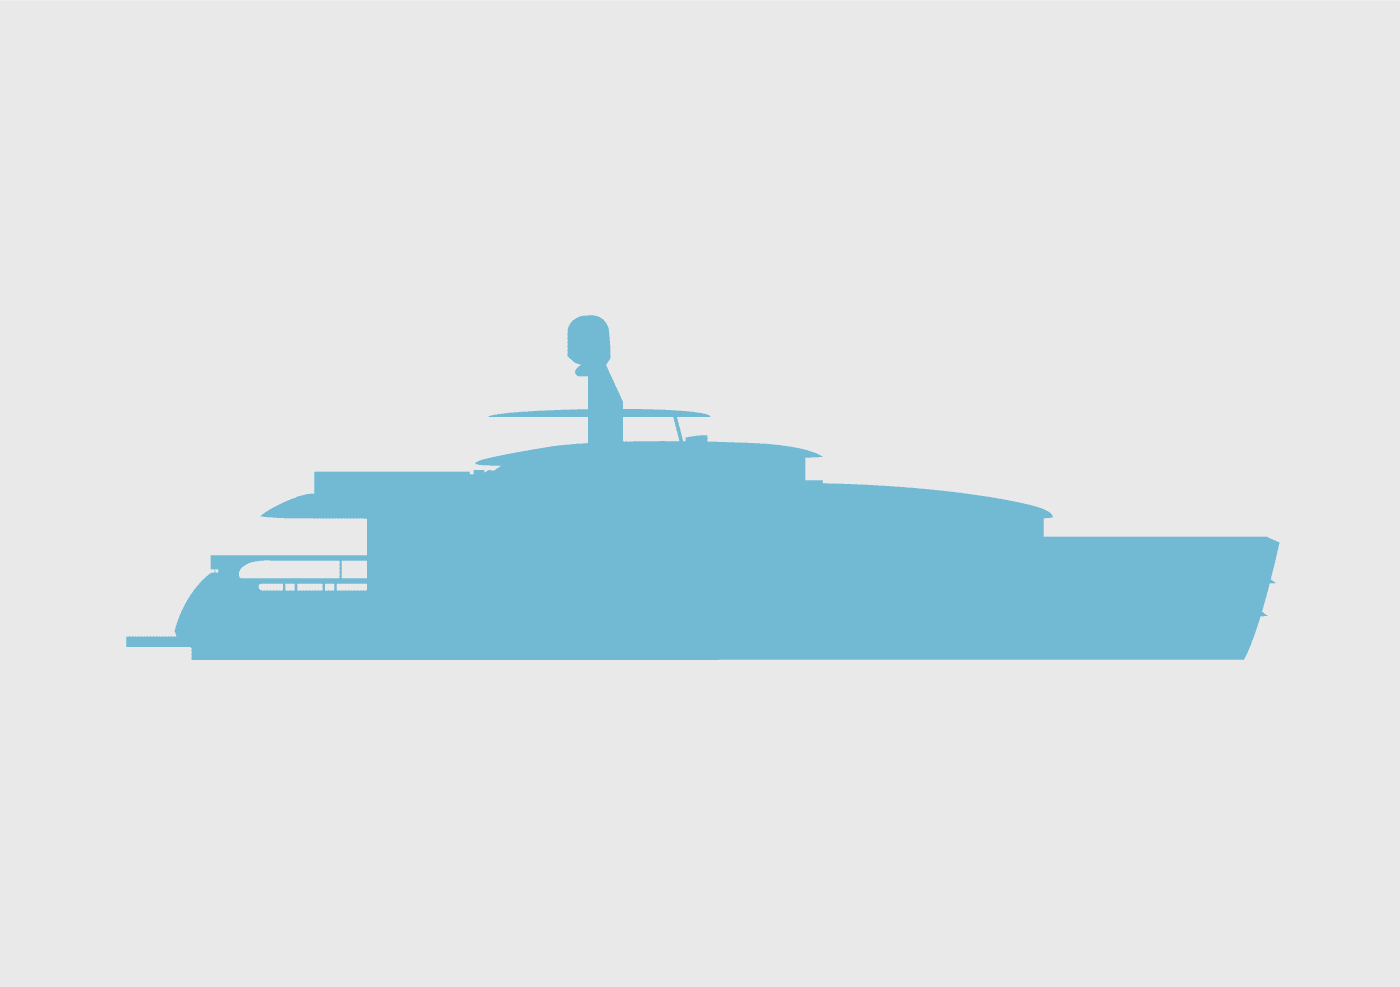 ALY302 blue superyacht silhouette